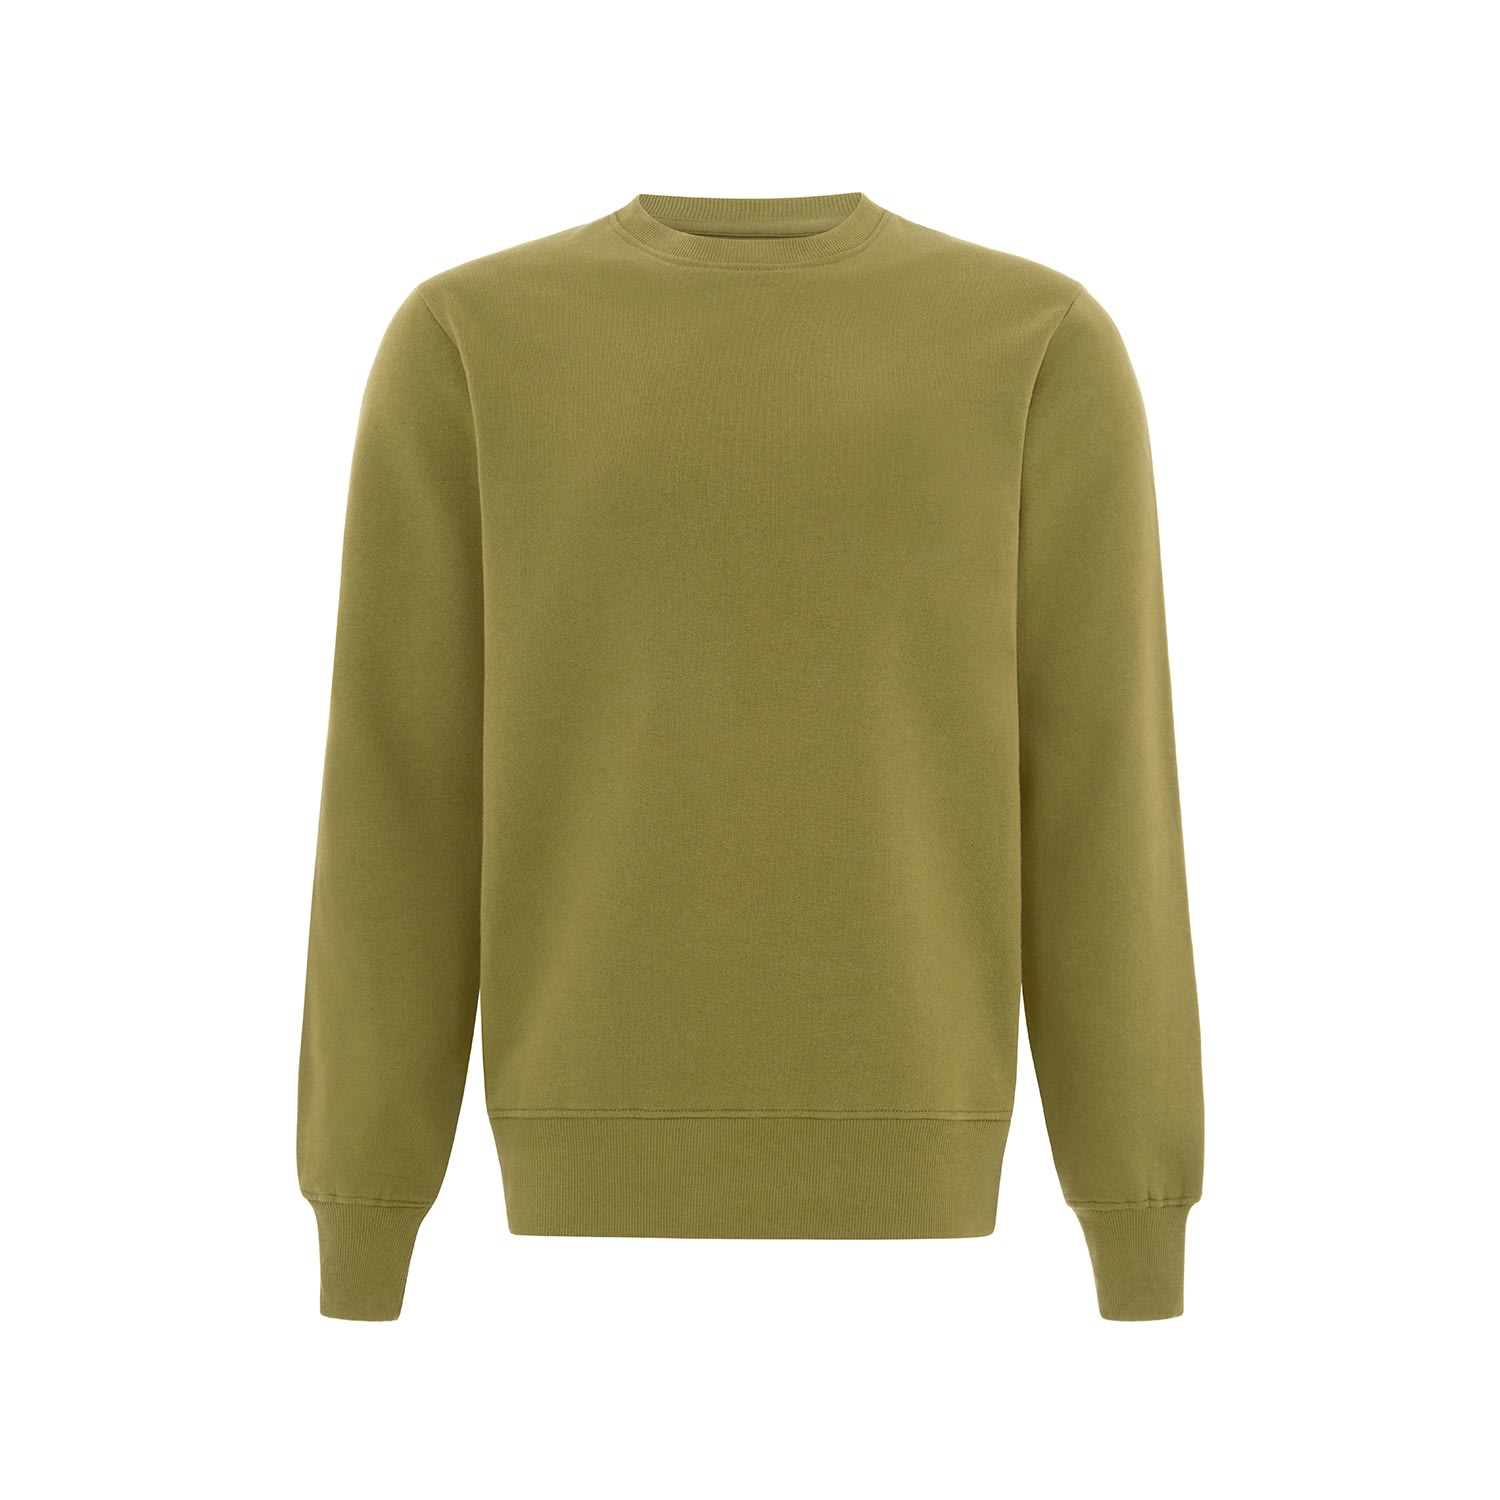 The Og Soft Organic Cotton Mens Sweatshirt In Green Small blonde gone rogue